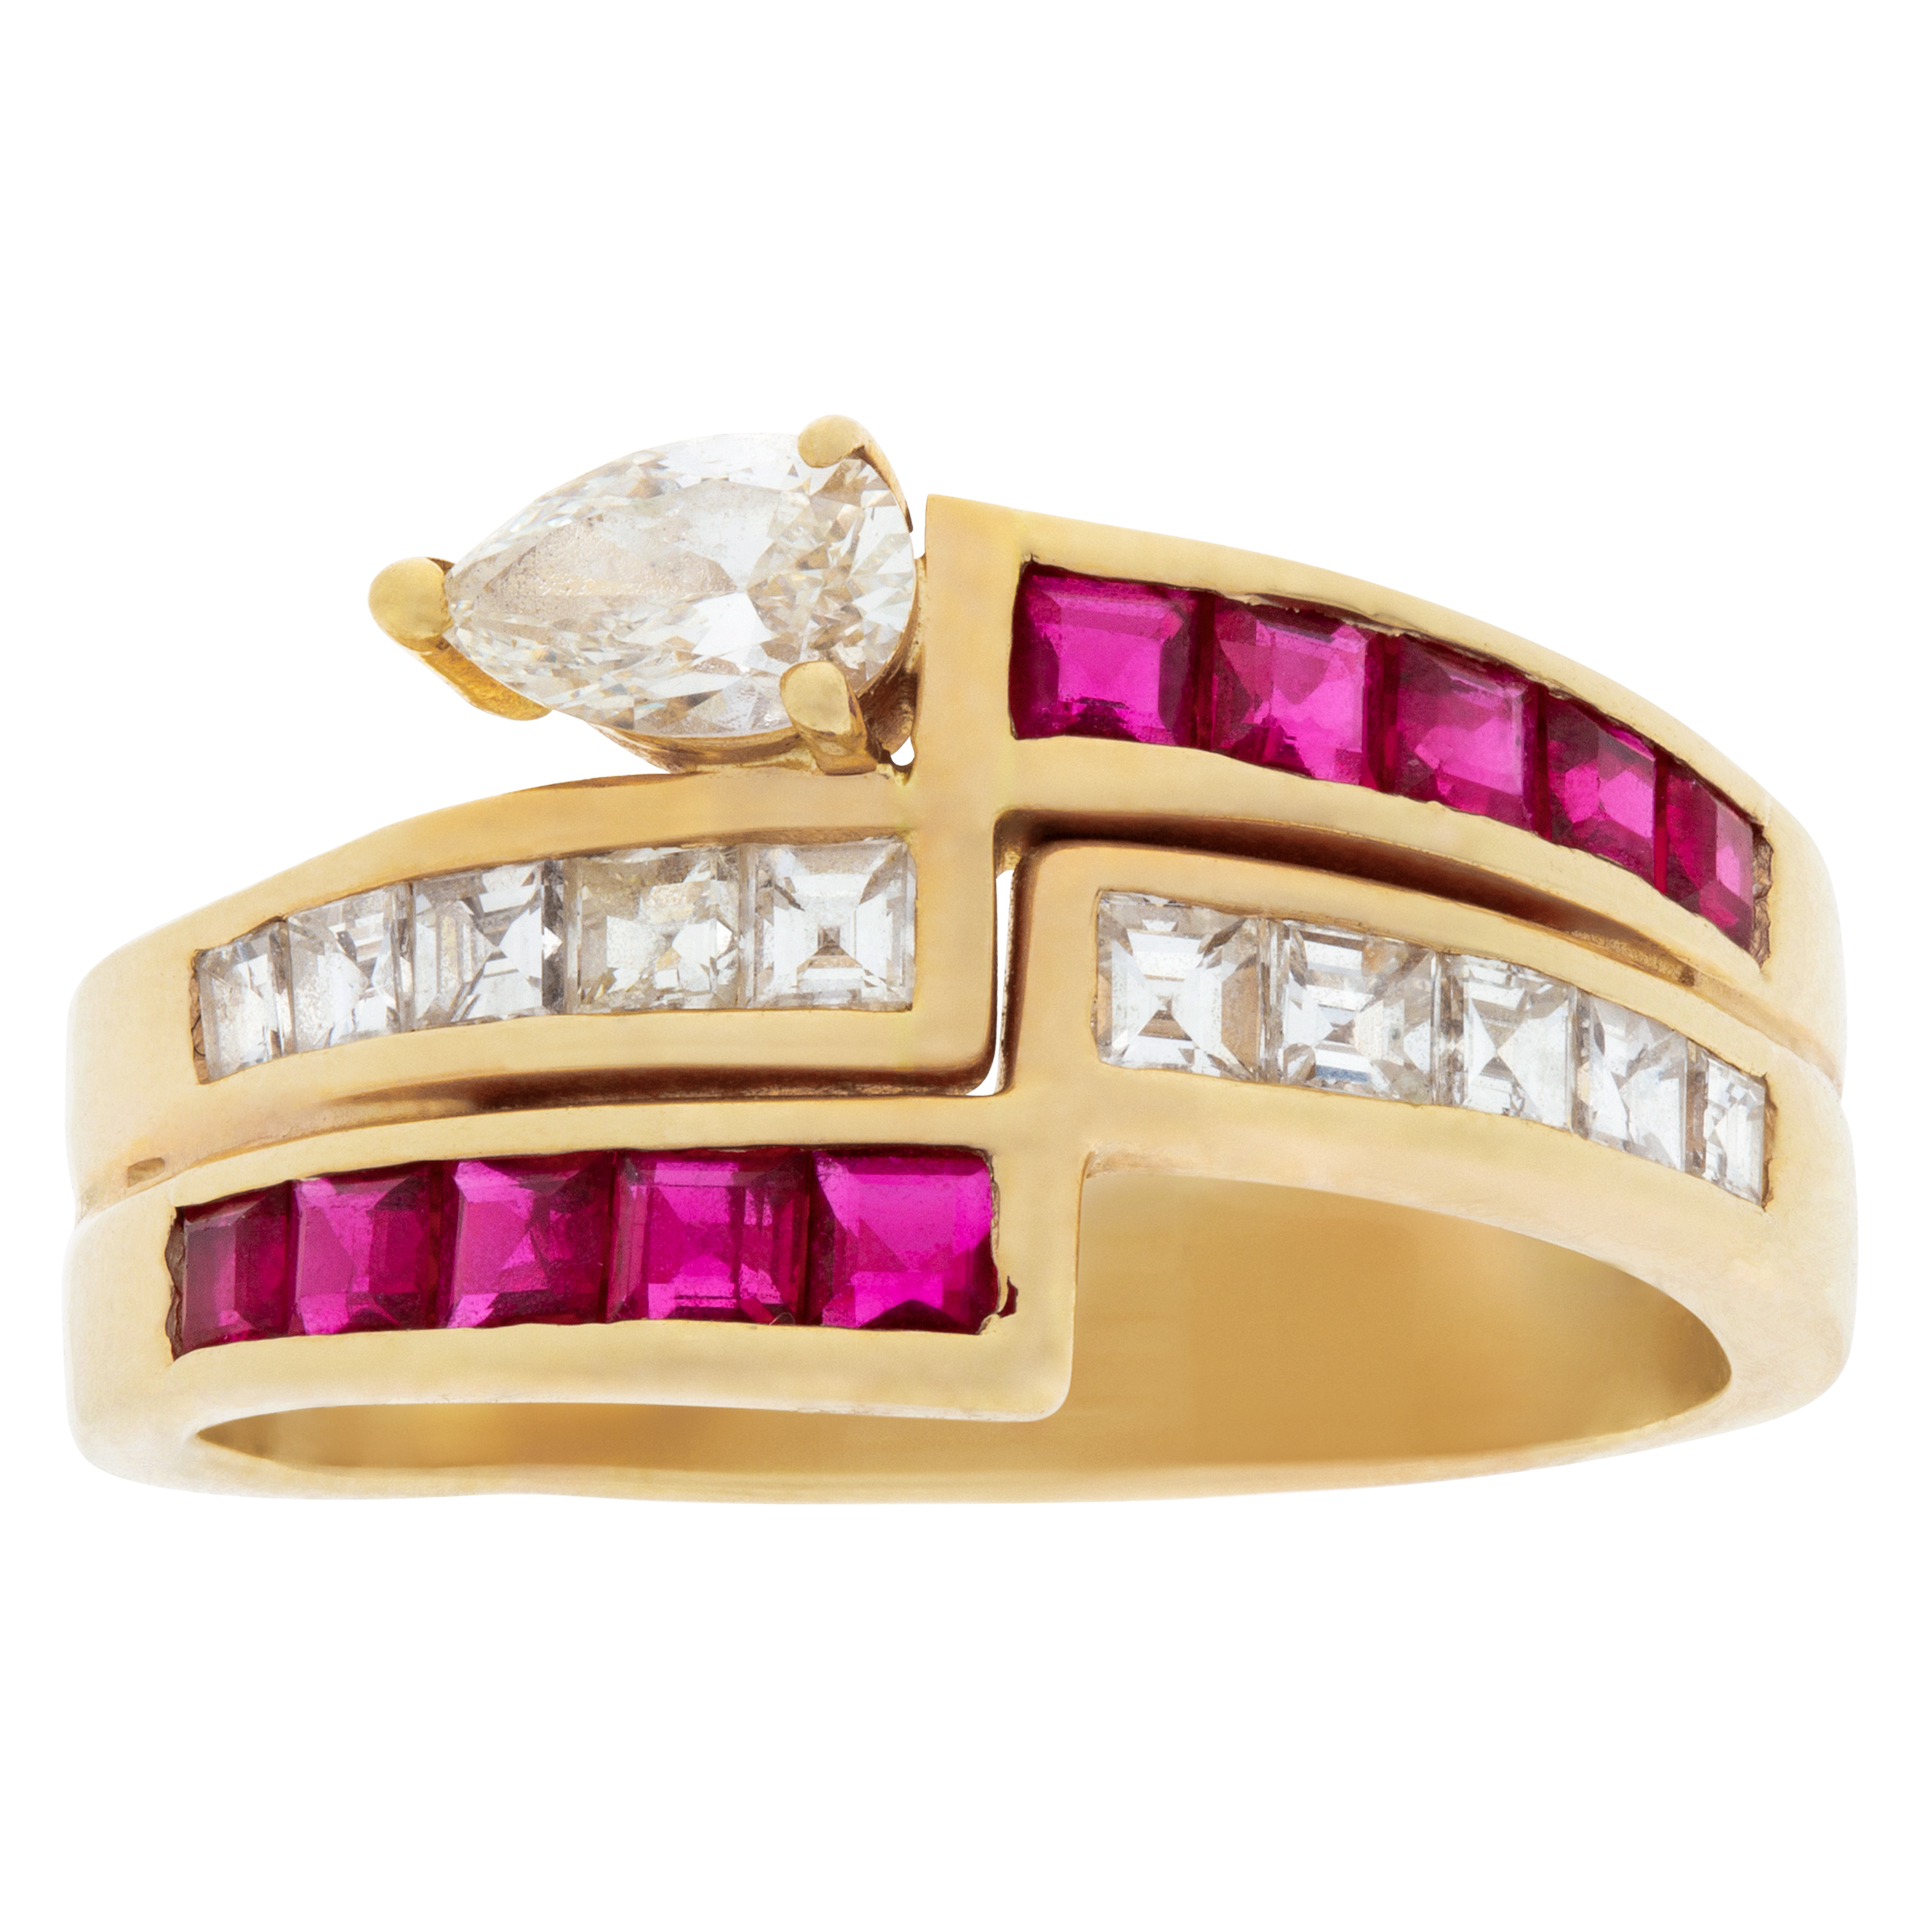 Ruby & diamond ring in 18k yellow gold with approximately 0.80 carats in pear and princess cut diamonds